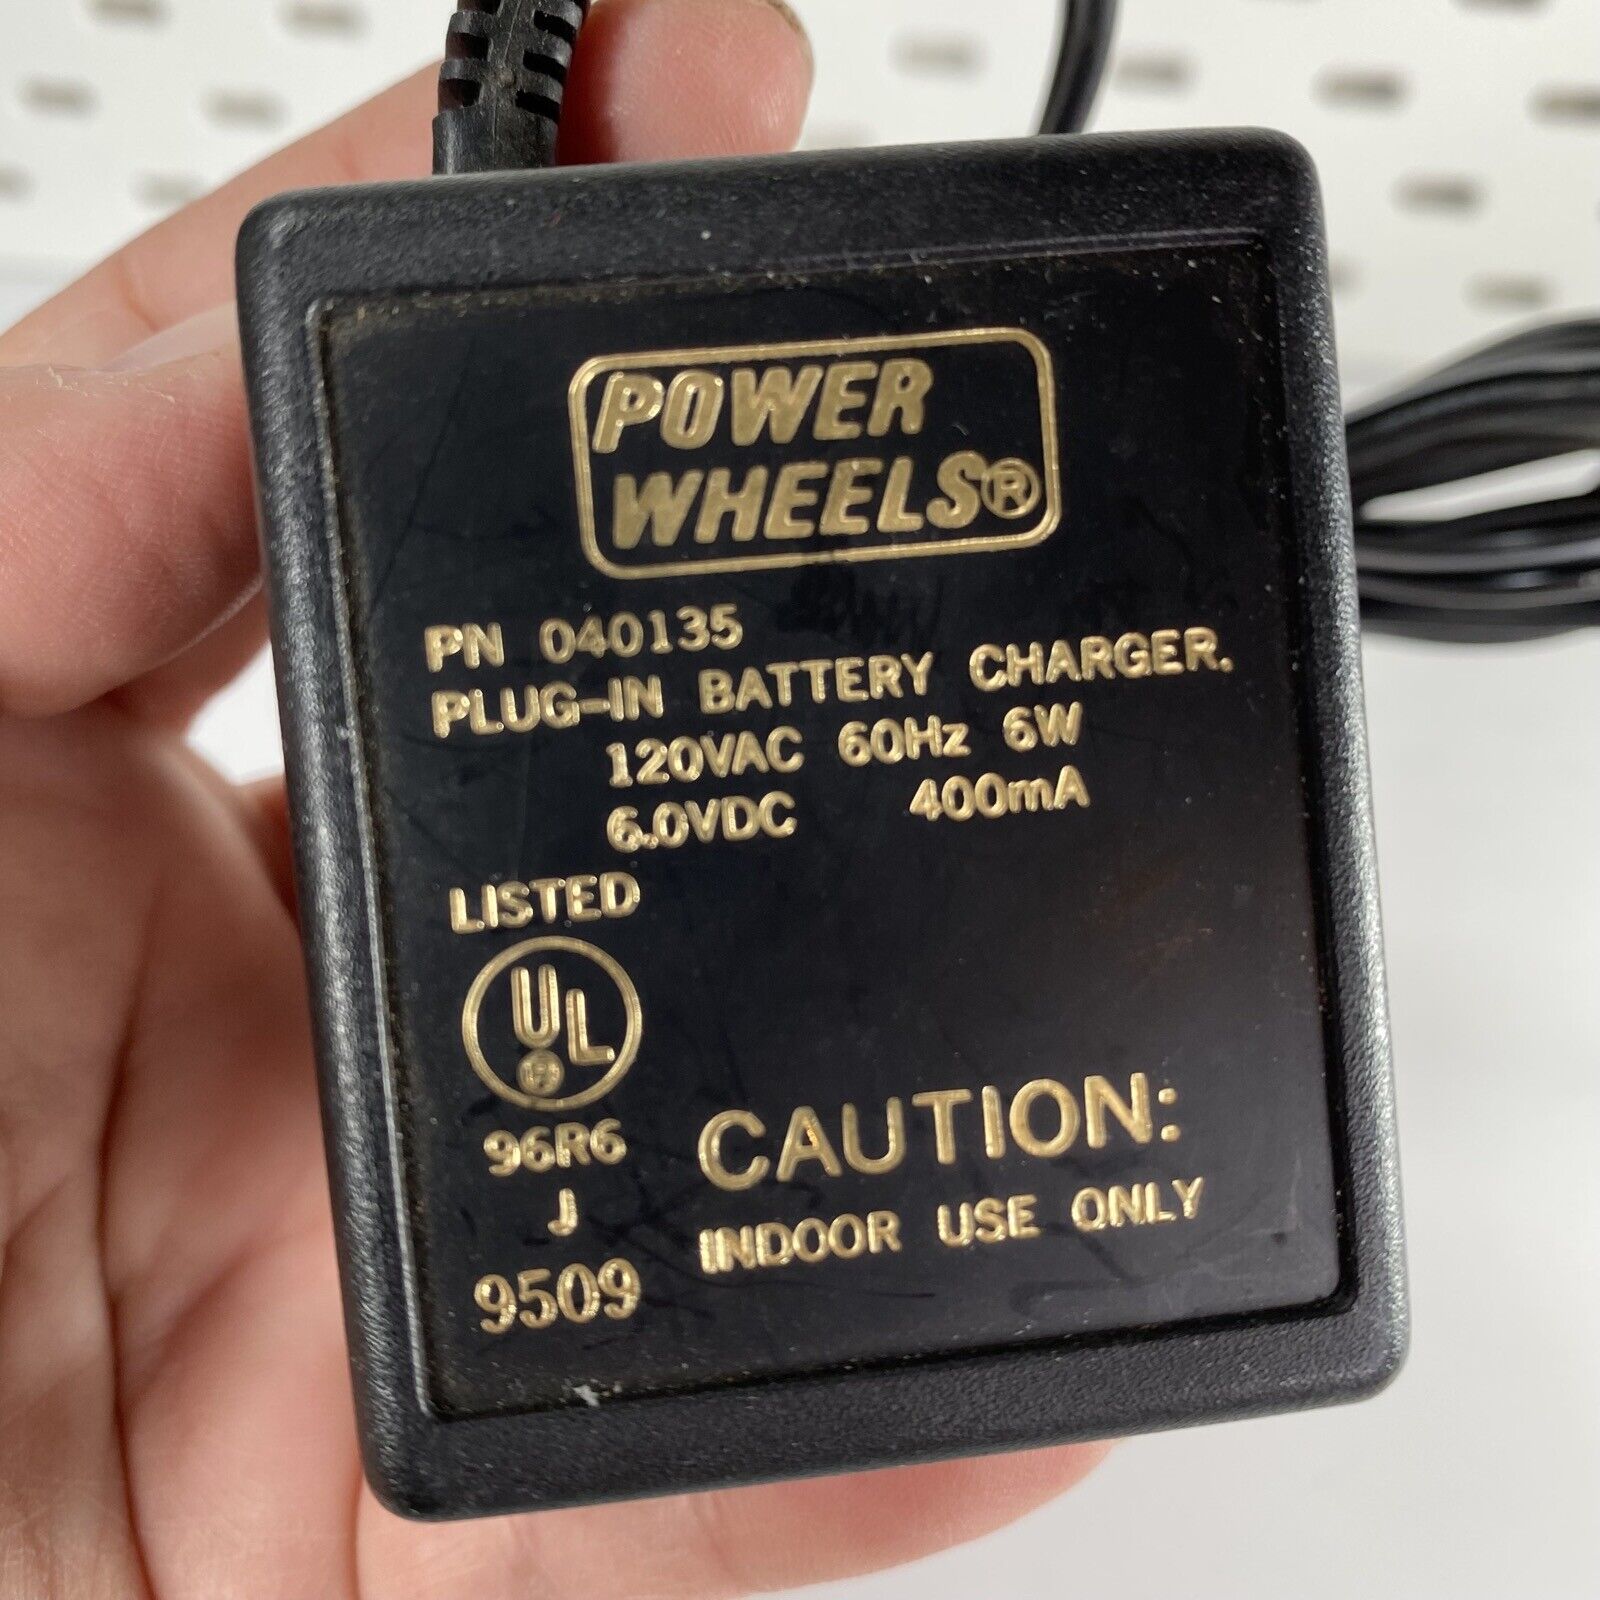 Genuine Power Wheels Plug In Battery Charger Type H 040135 6V 400mA 100% Working